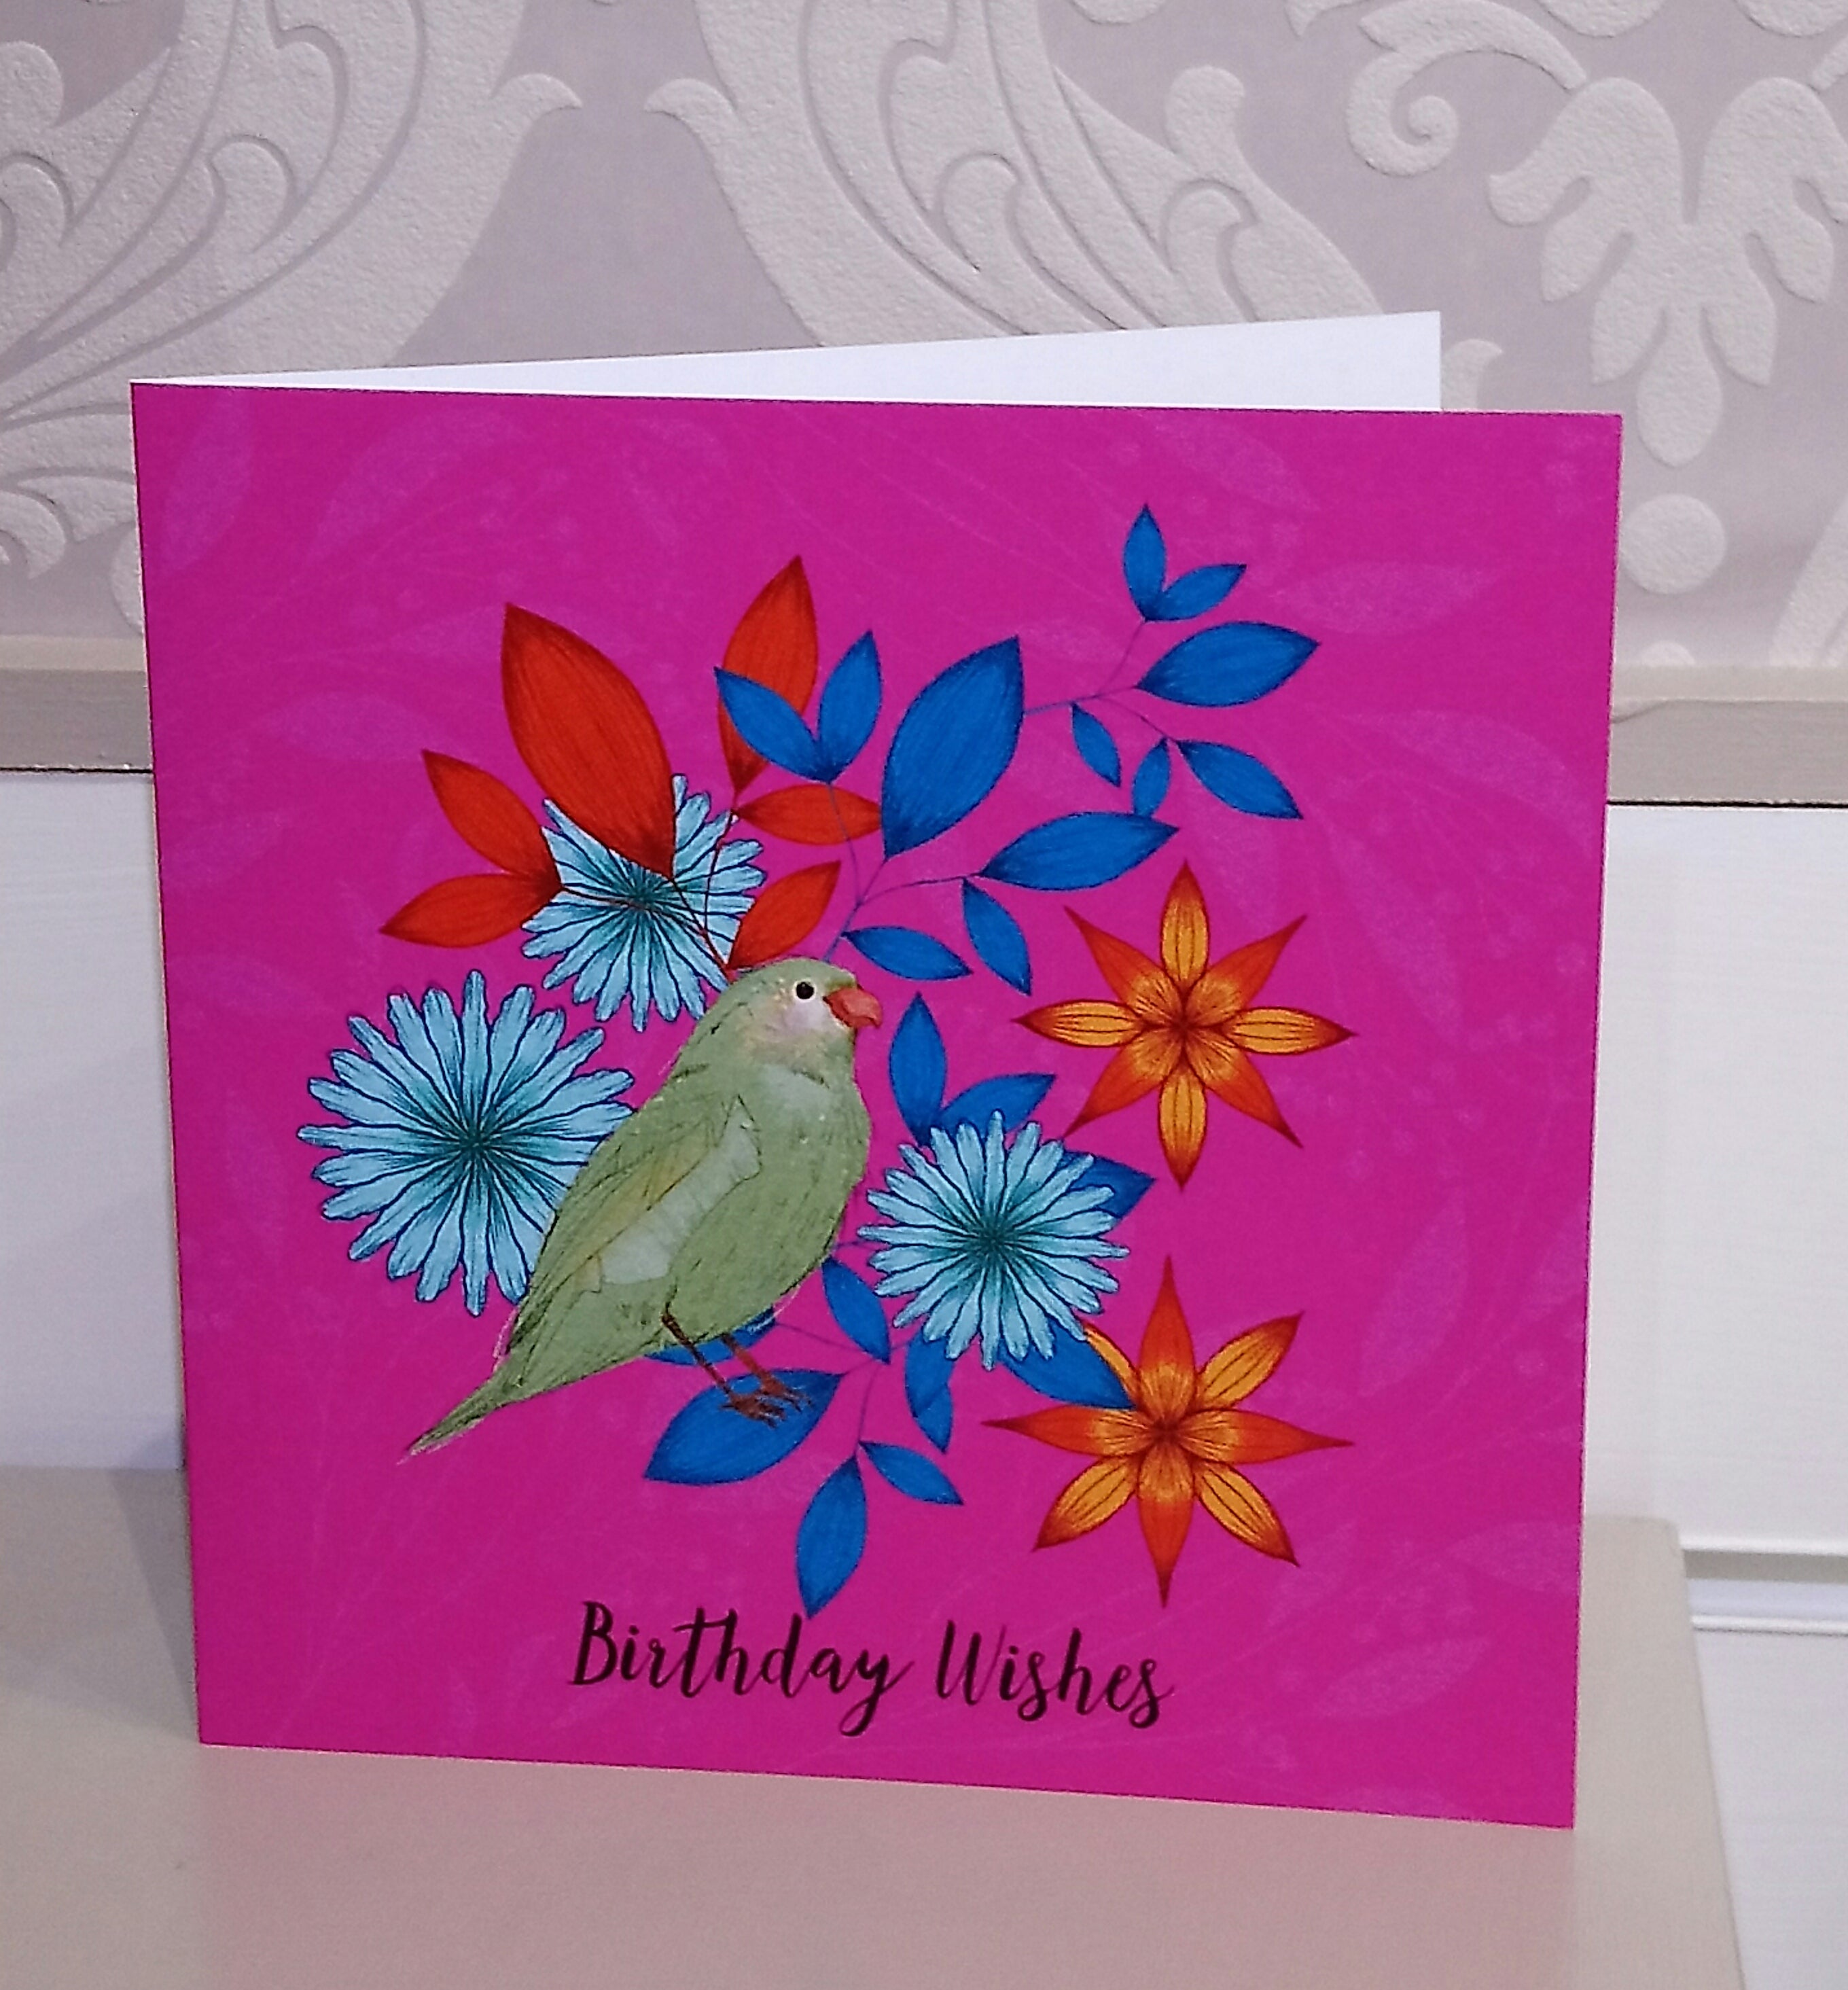 'Birthday Wishes' Pink Card SPR2231 designed by Ilana Ewing